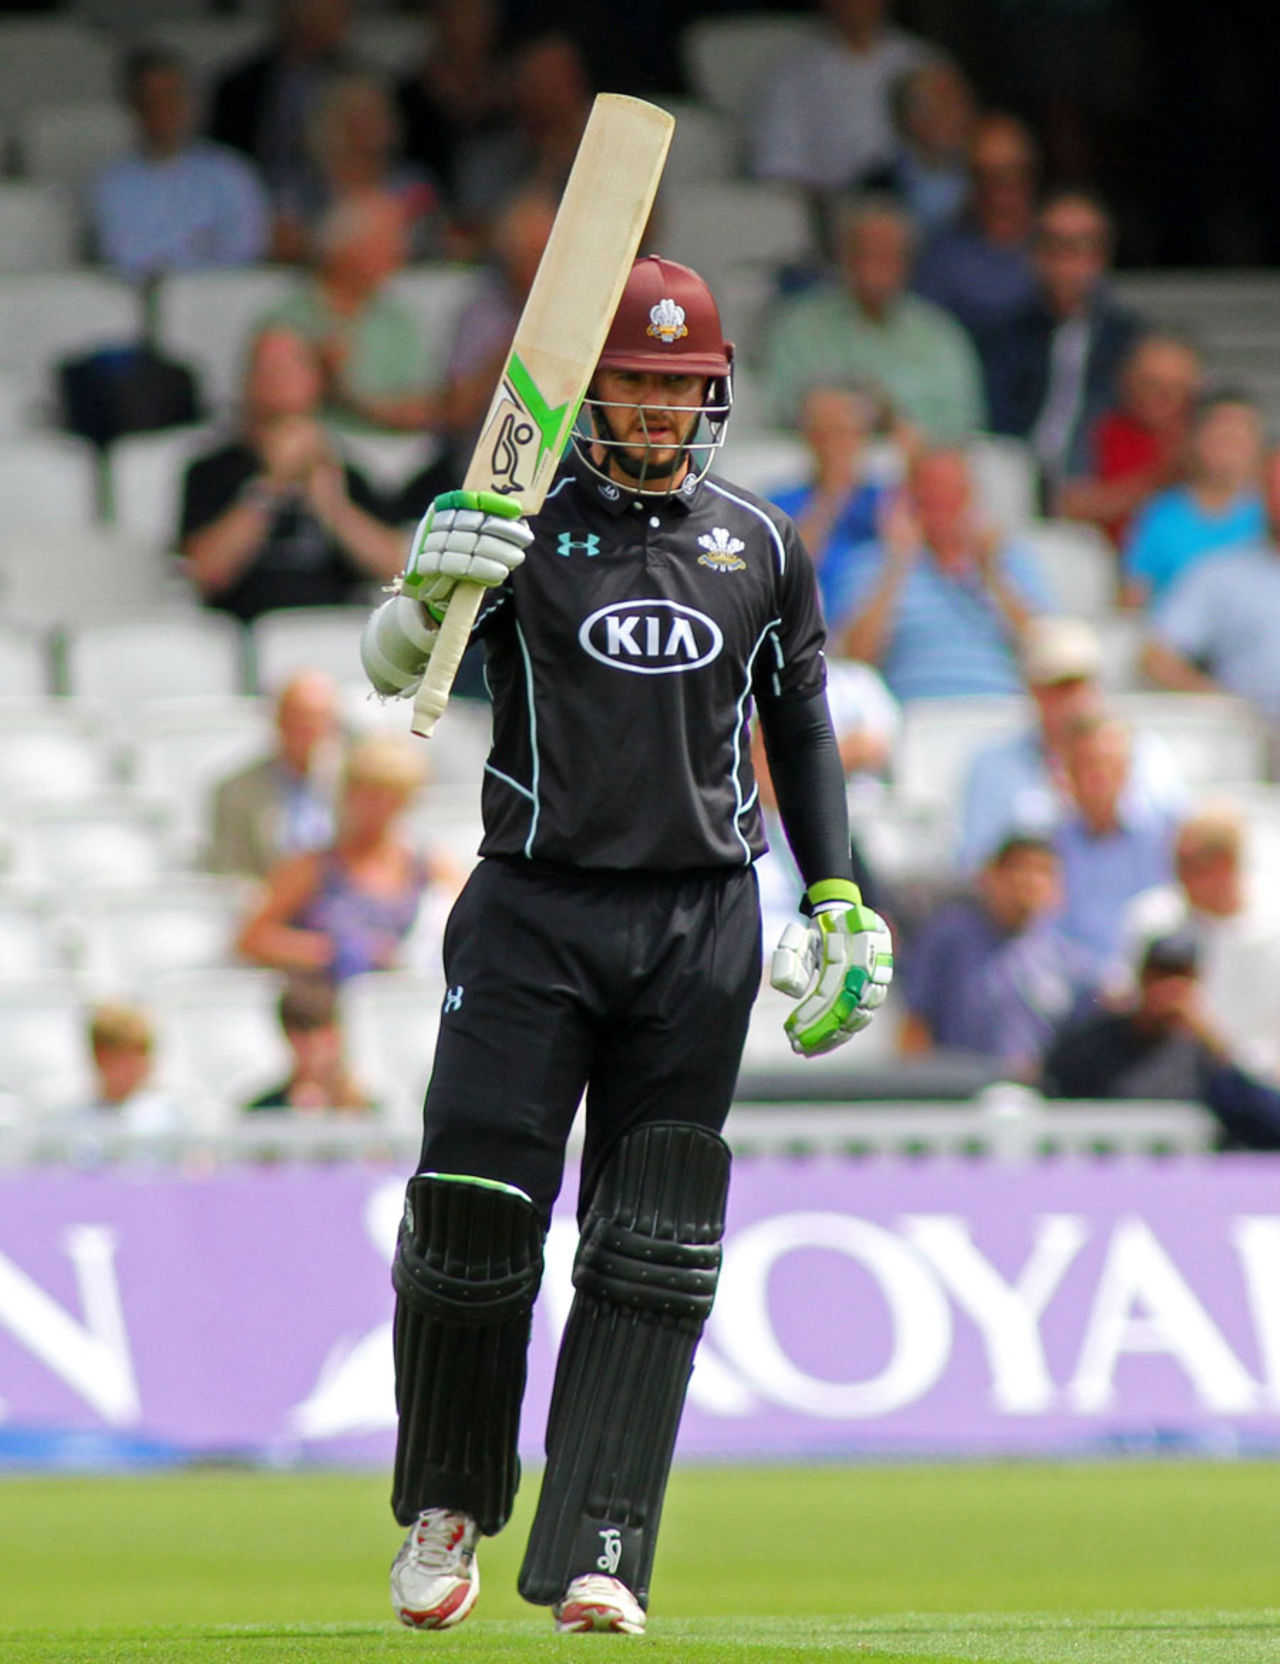 Steven Davies anchored the innings with a half-century, Surrey v Gloucestershire, Royal London Cup, South Group, The Oval, July 27, 2016